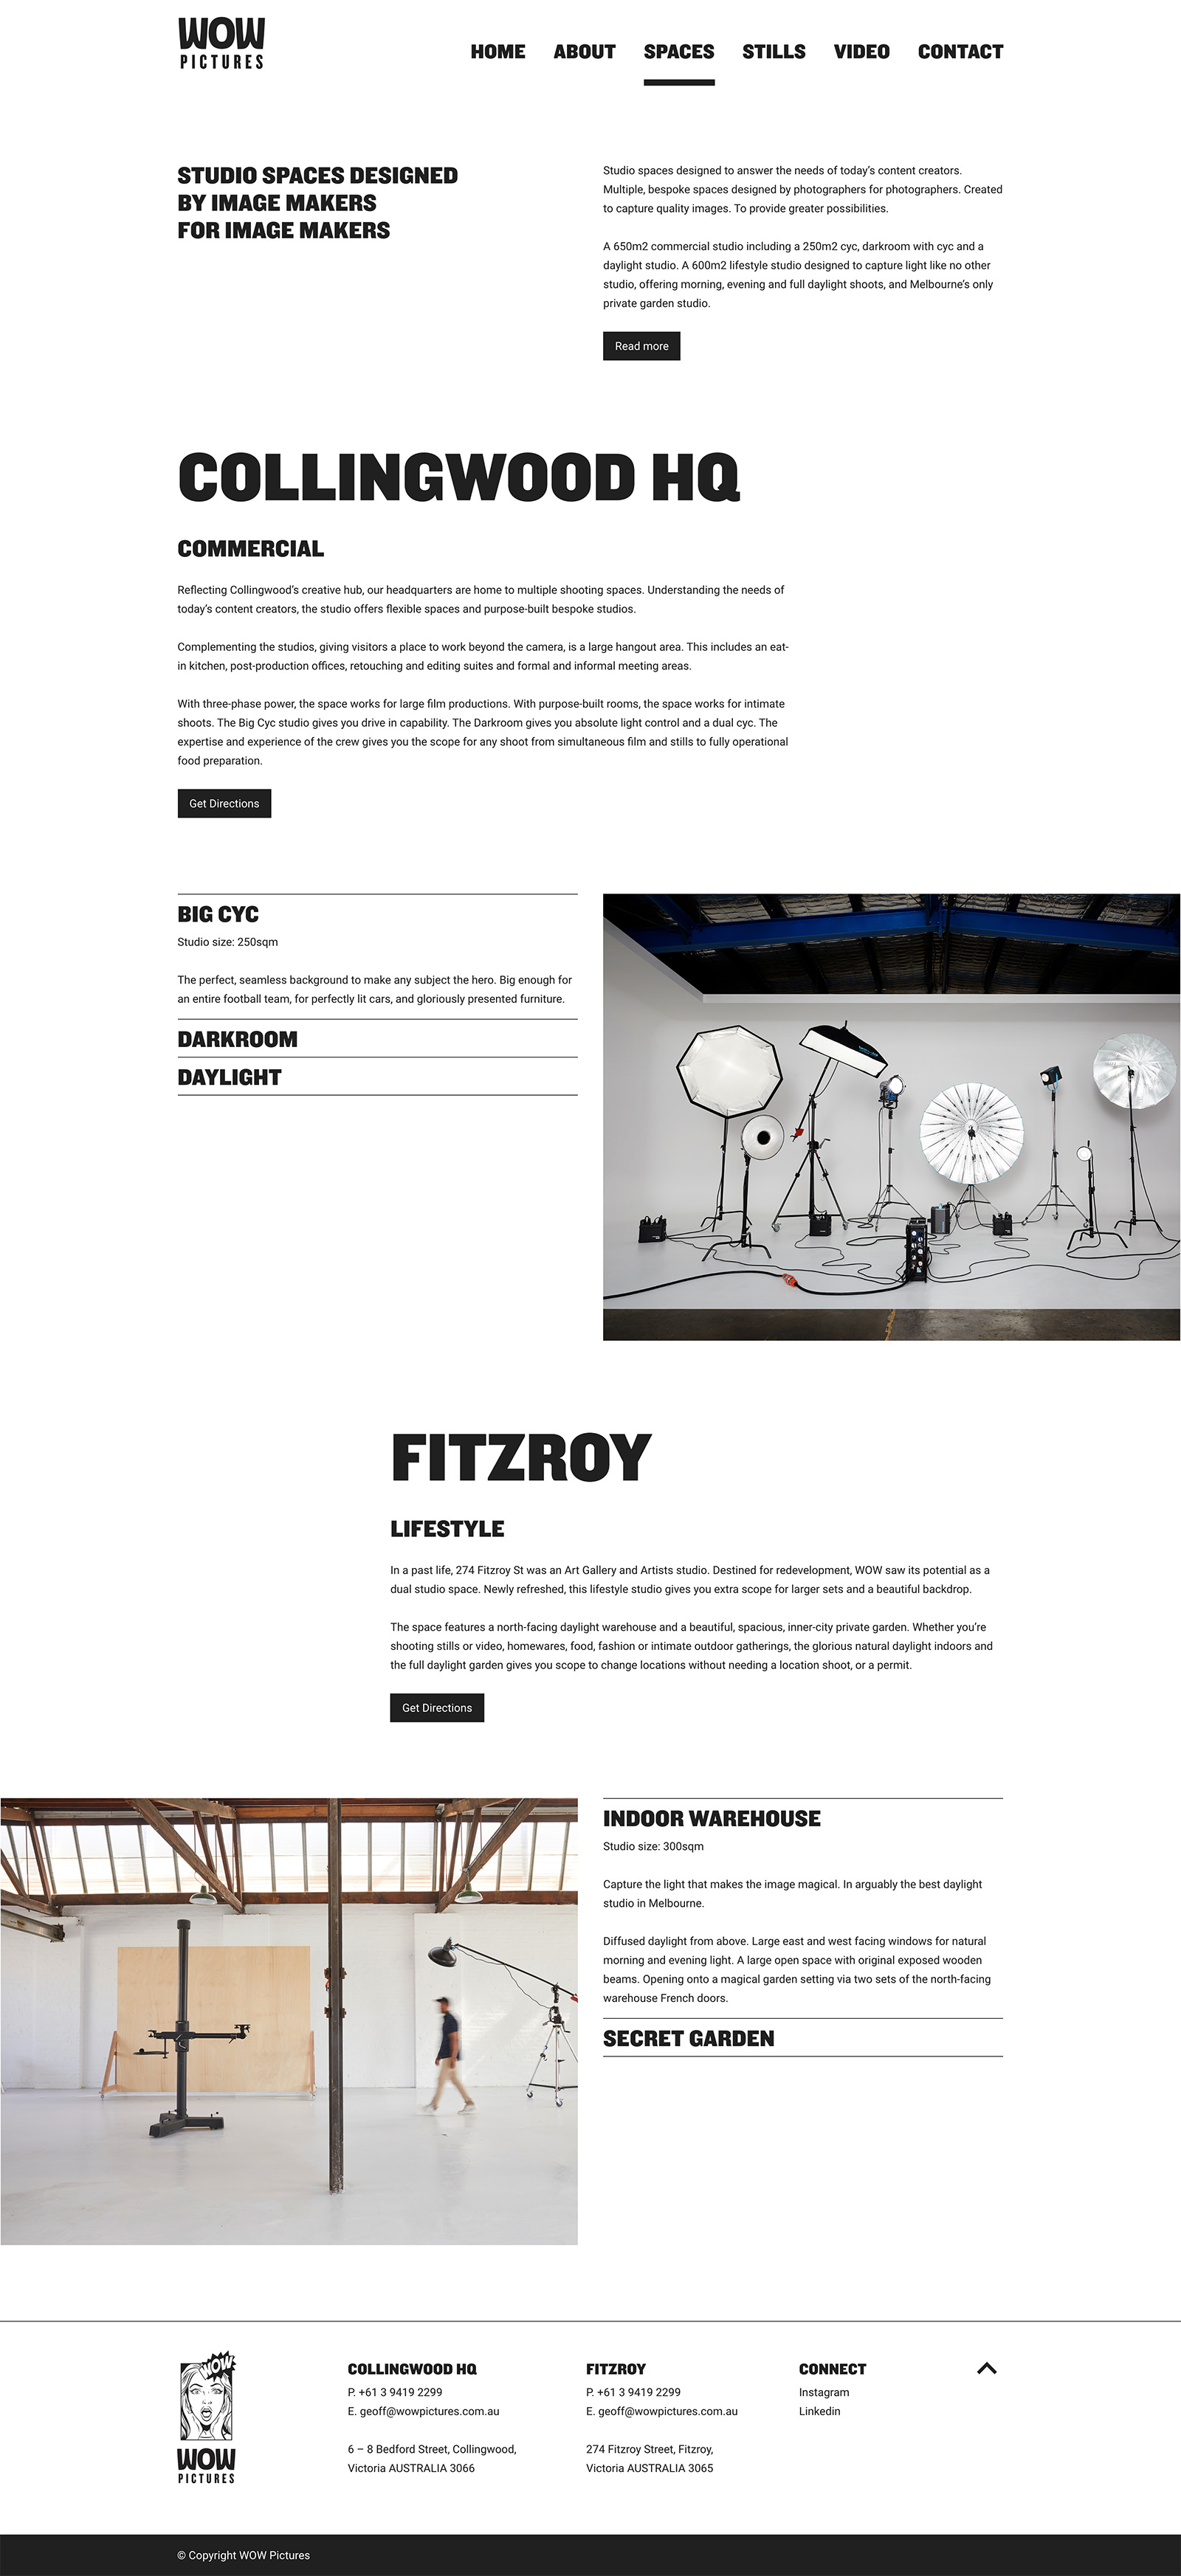 wow-pictures-fitzroy-freelance-interactive-design